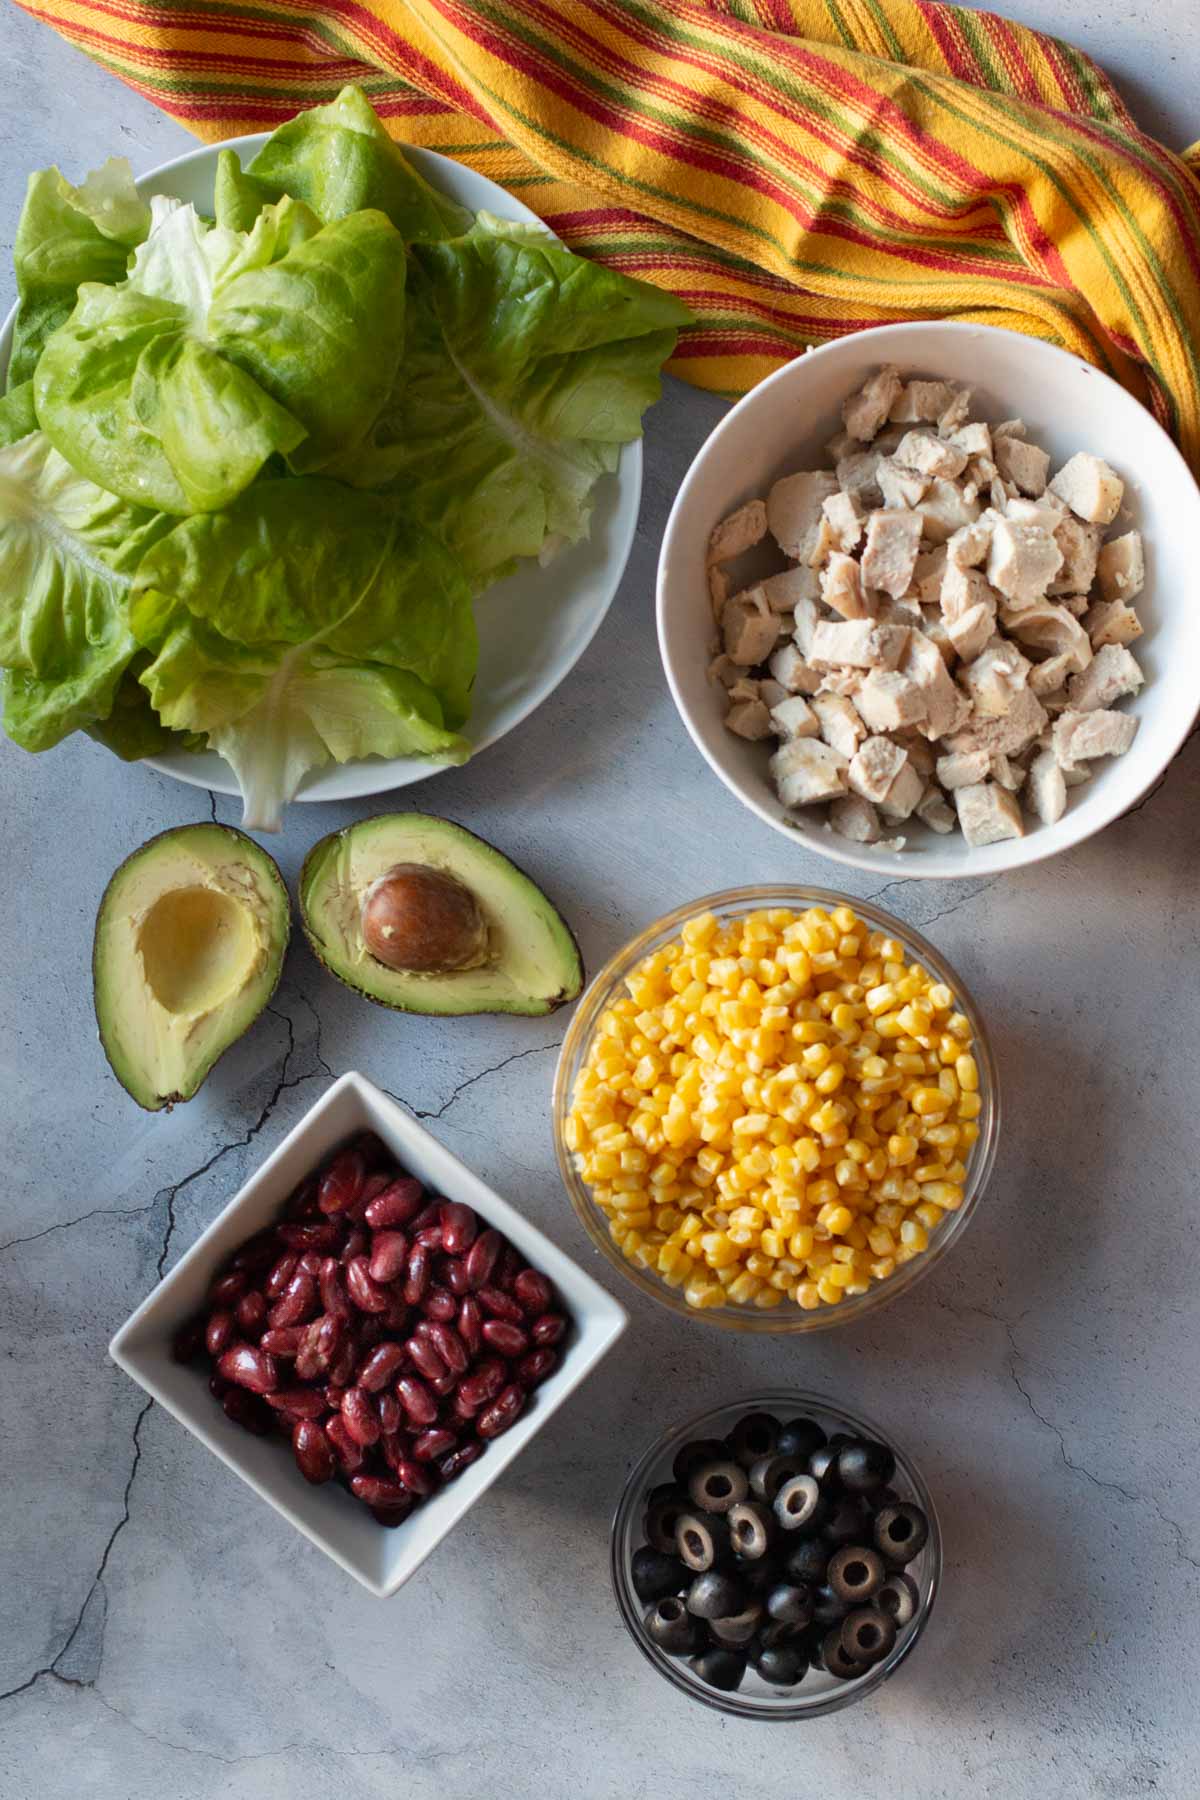 Ingredients to make Mexican Chicken Salad